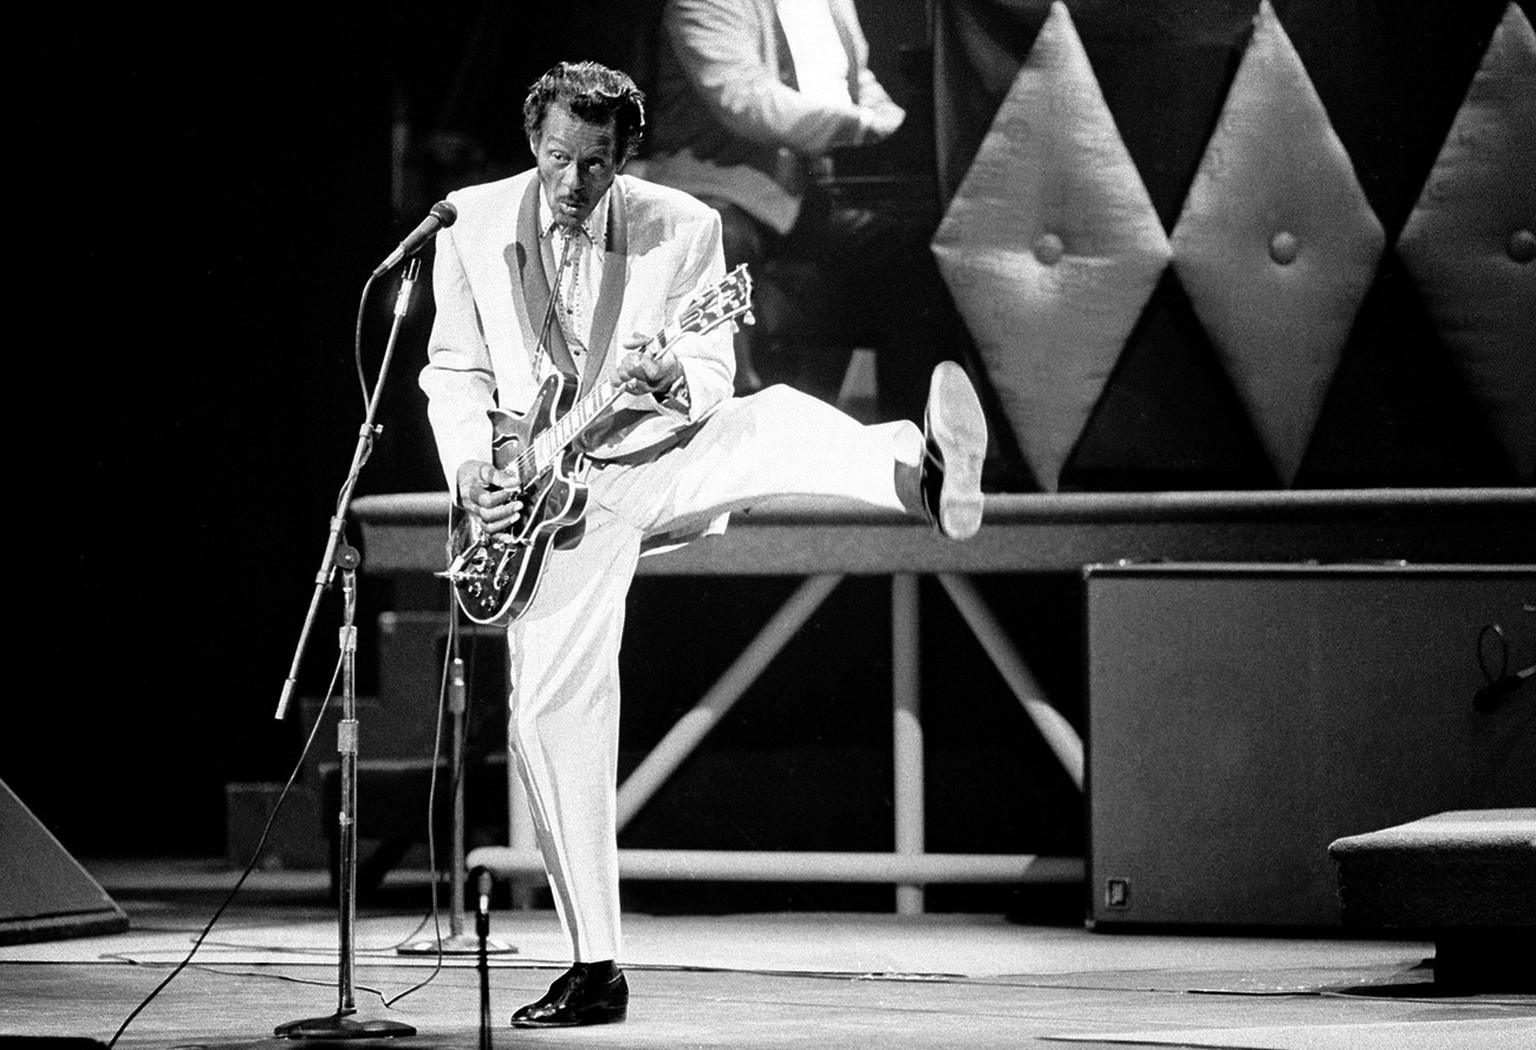 FILE - In this Oct. 17, 1986 file photo, Chuck Berry performs during a concert celebration for his 60th birthday at the Fox Theatre in St. Louis, Mo. On Saturday, March 18, 2017, police in Missouri sa ...